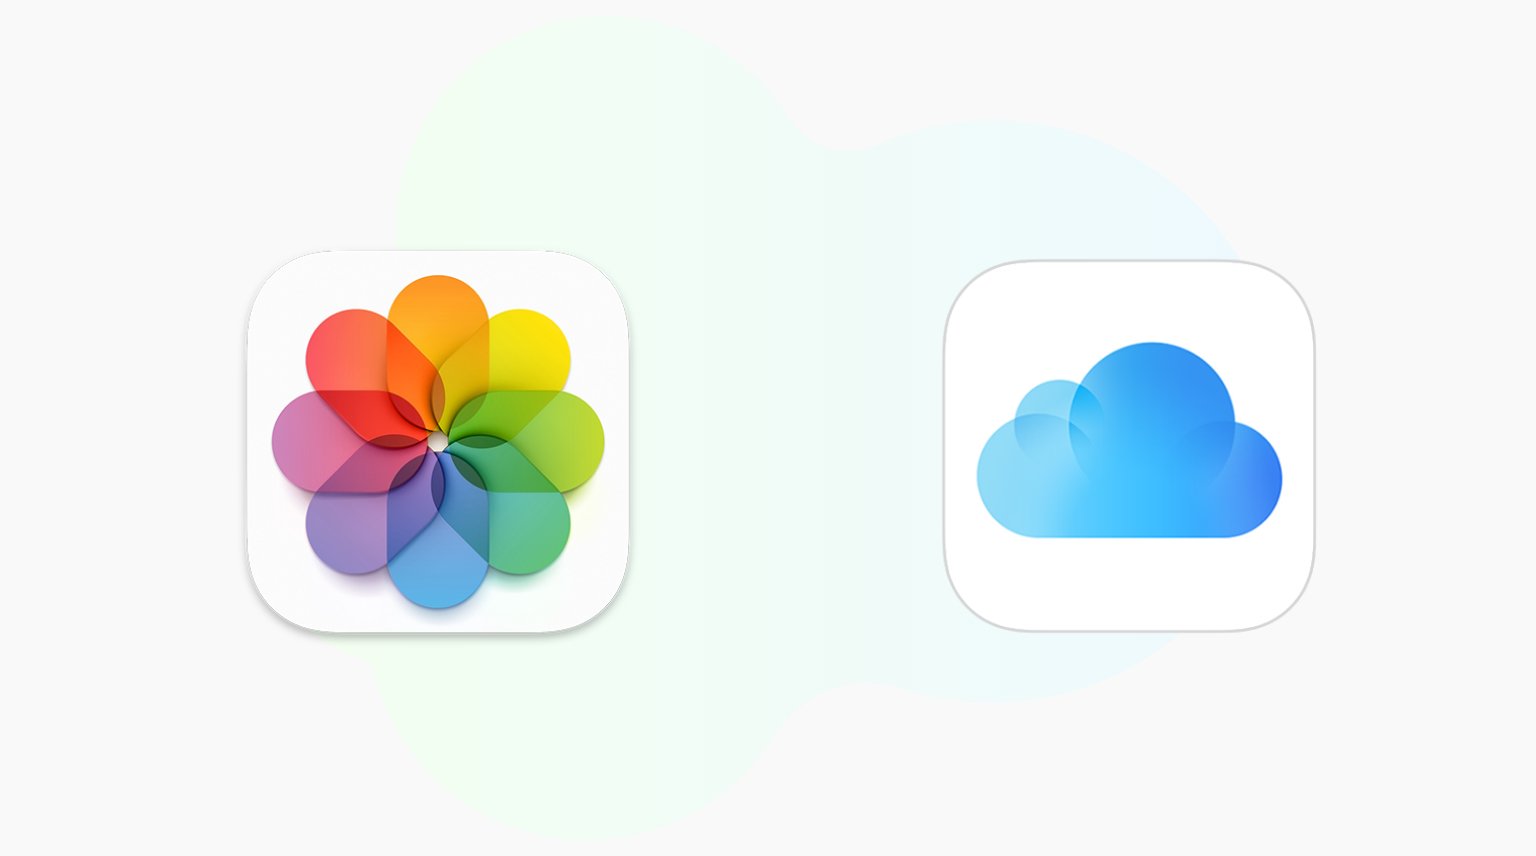 How to access photos on iCloud